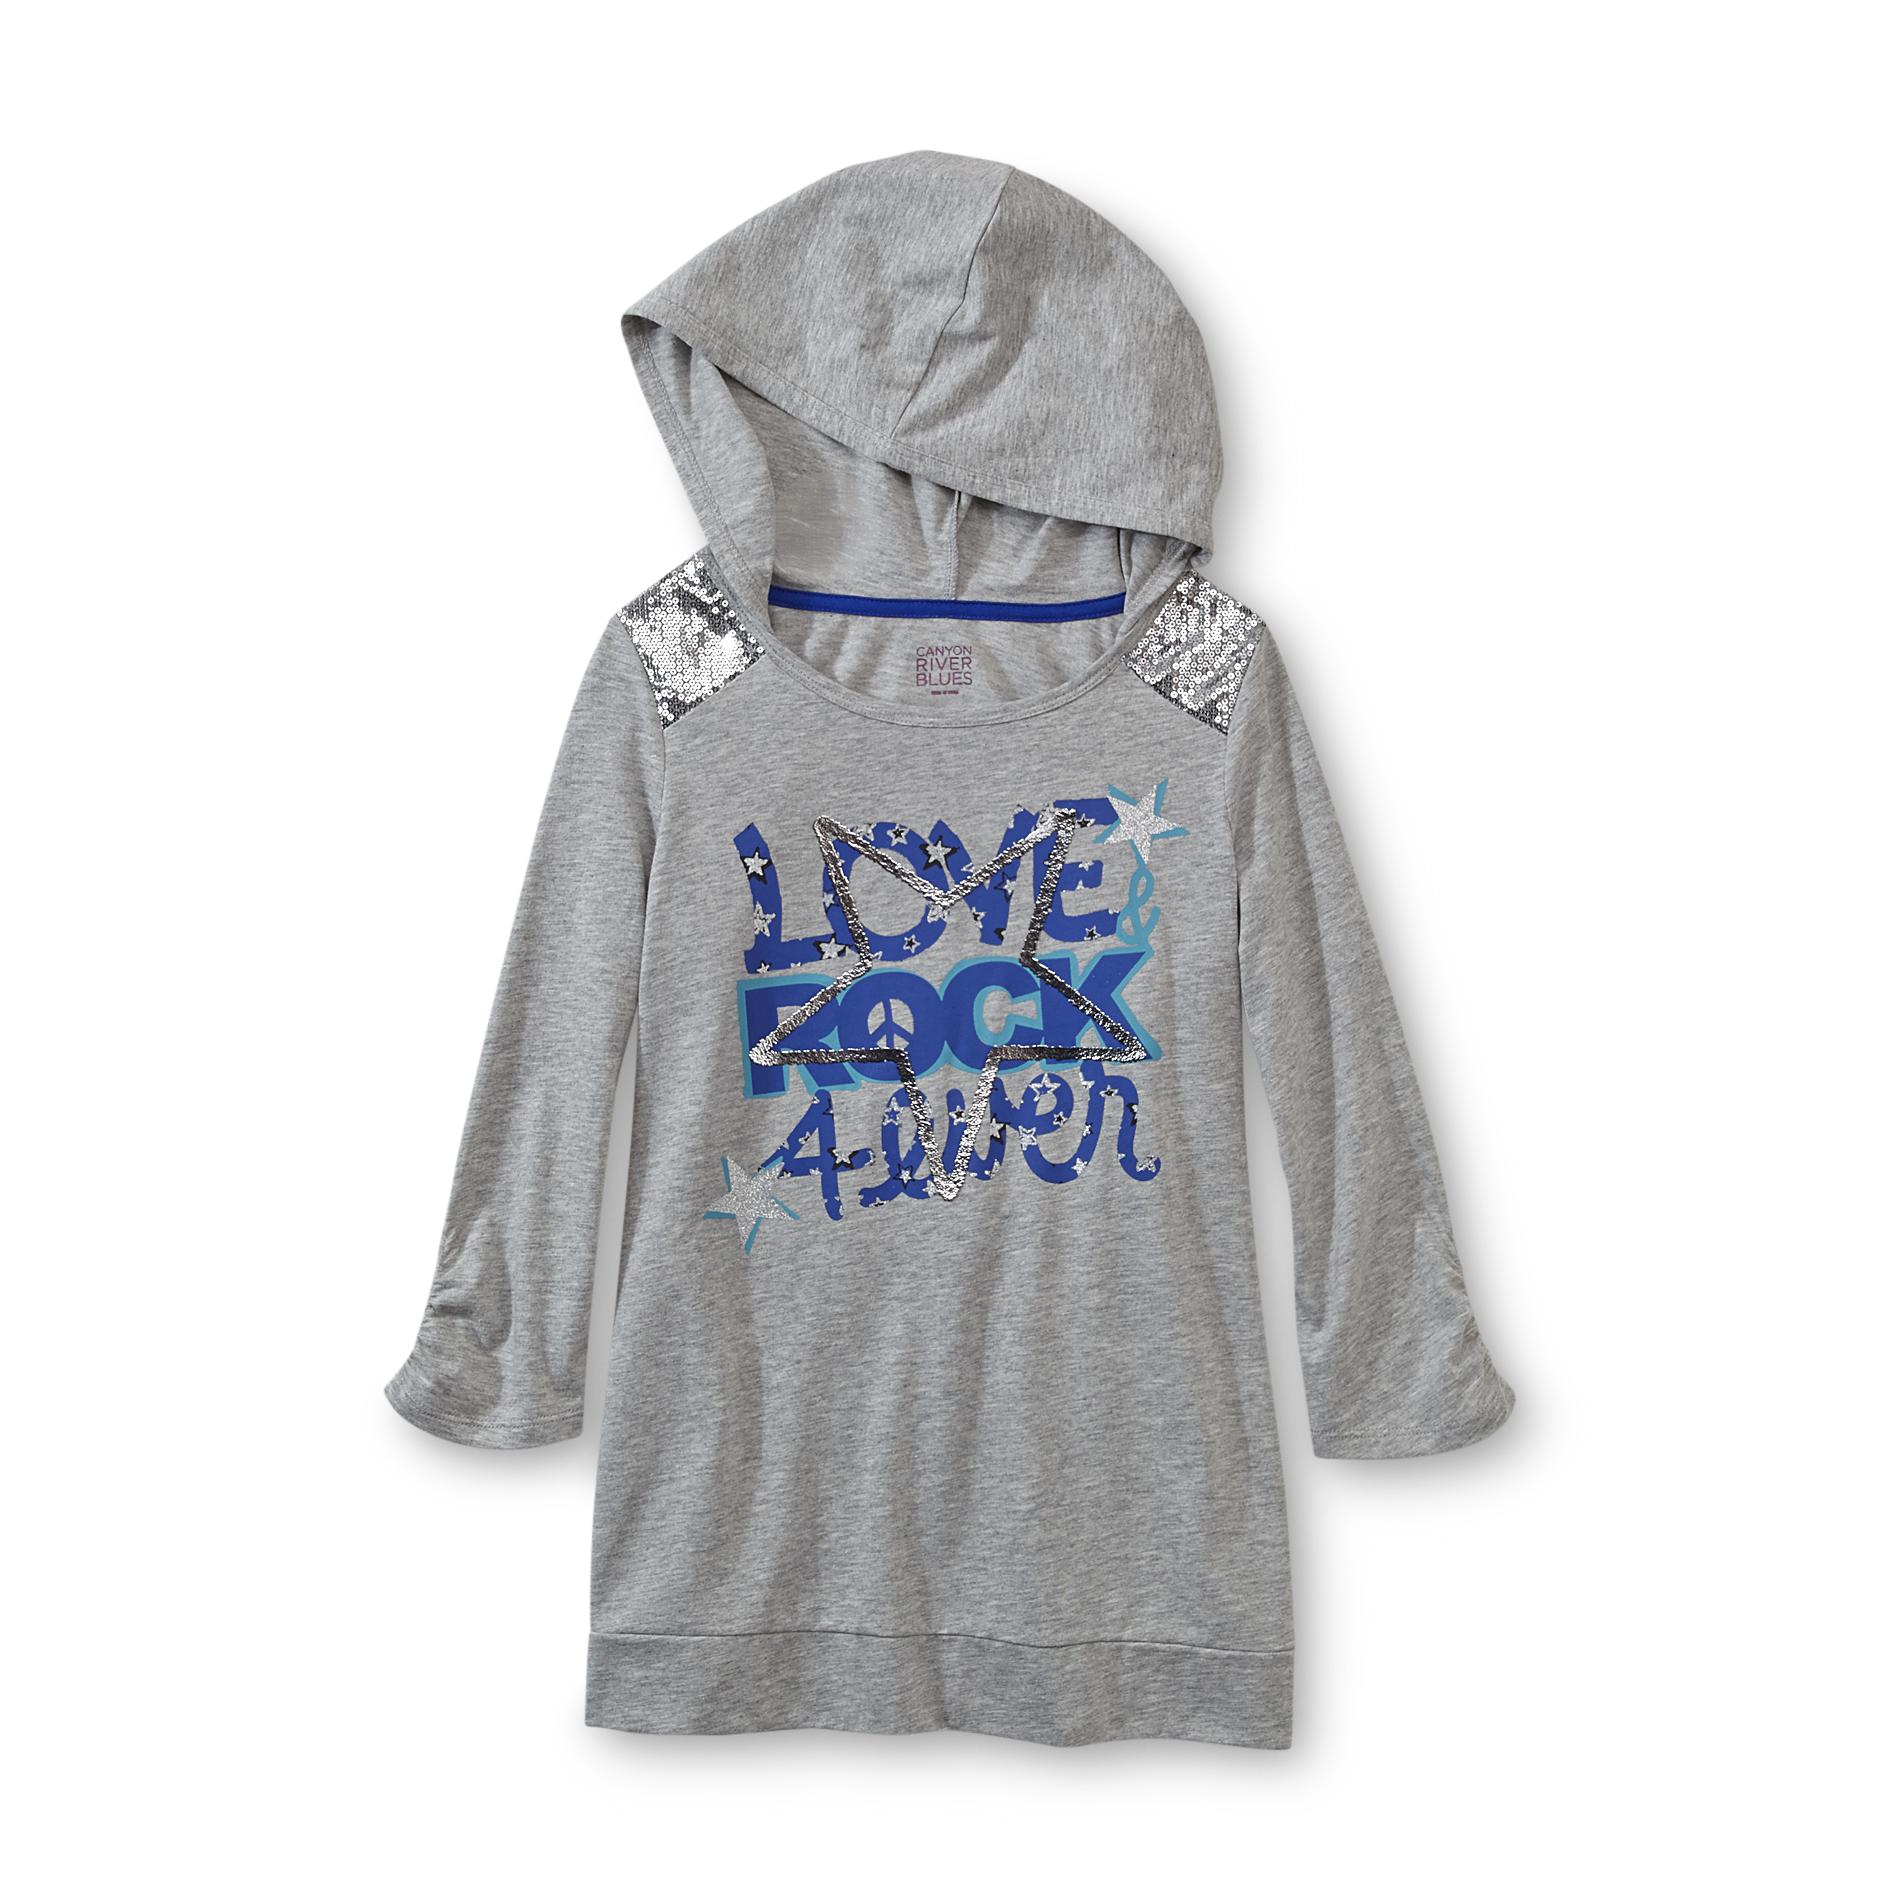 Canyon River Blues Girl's Sequined Hooded Tunic - Star